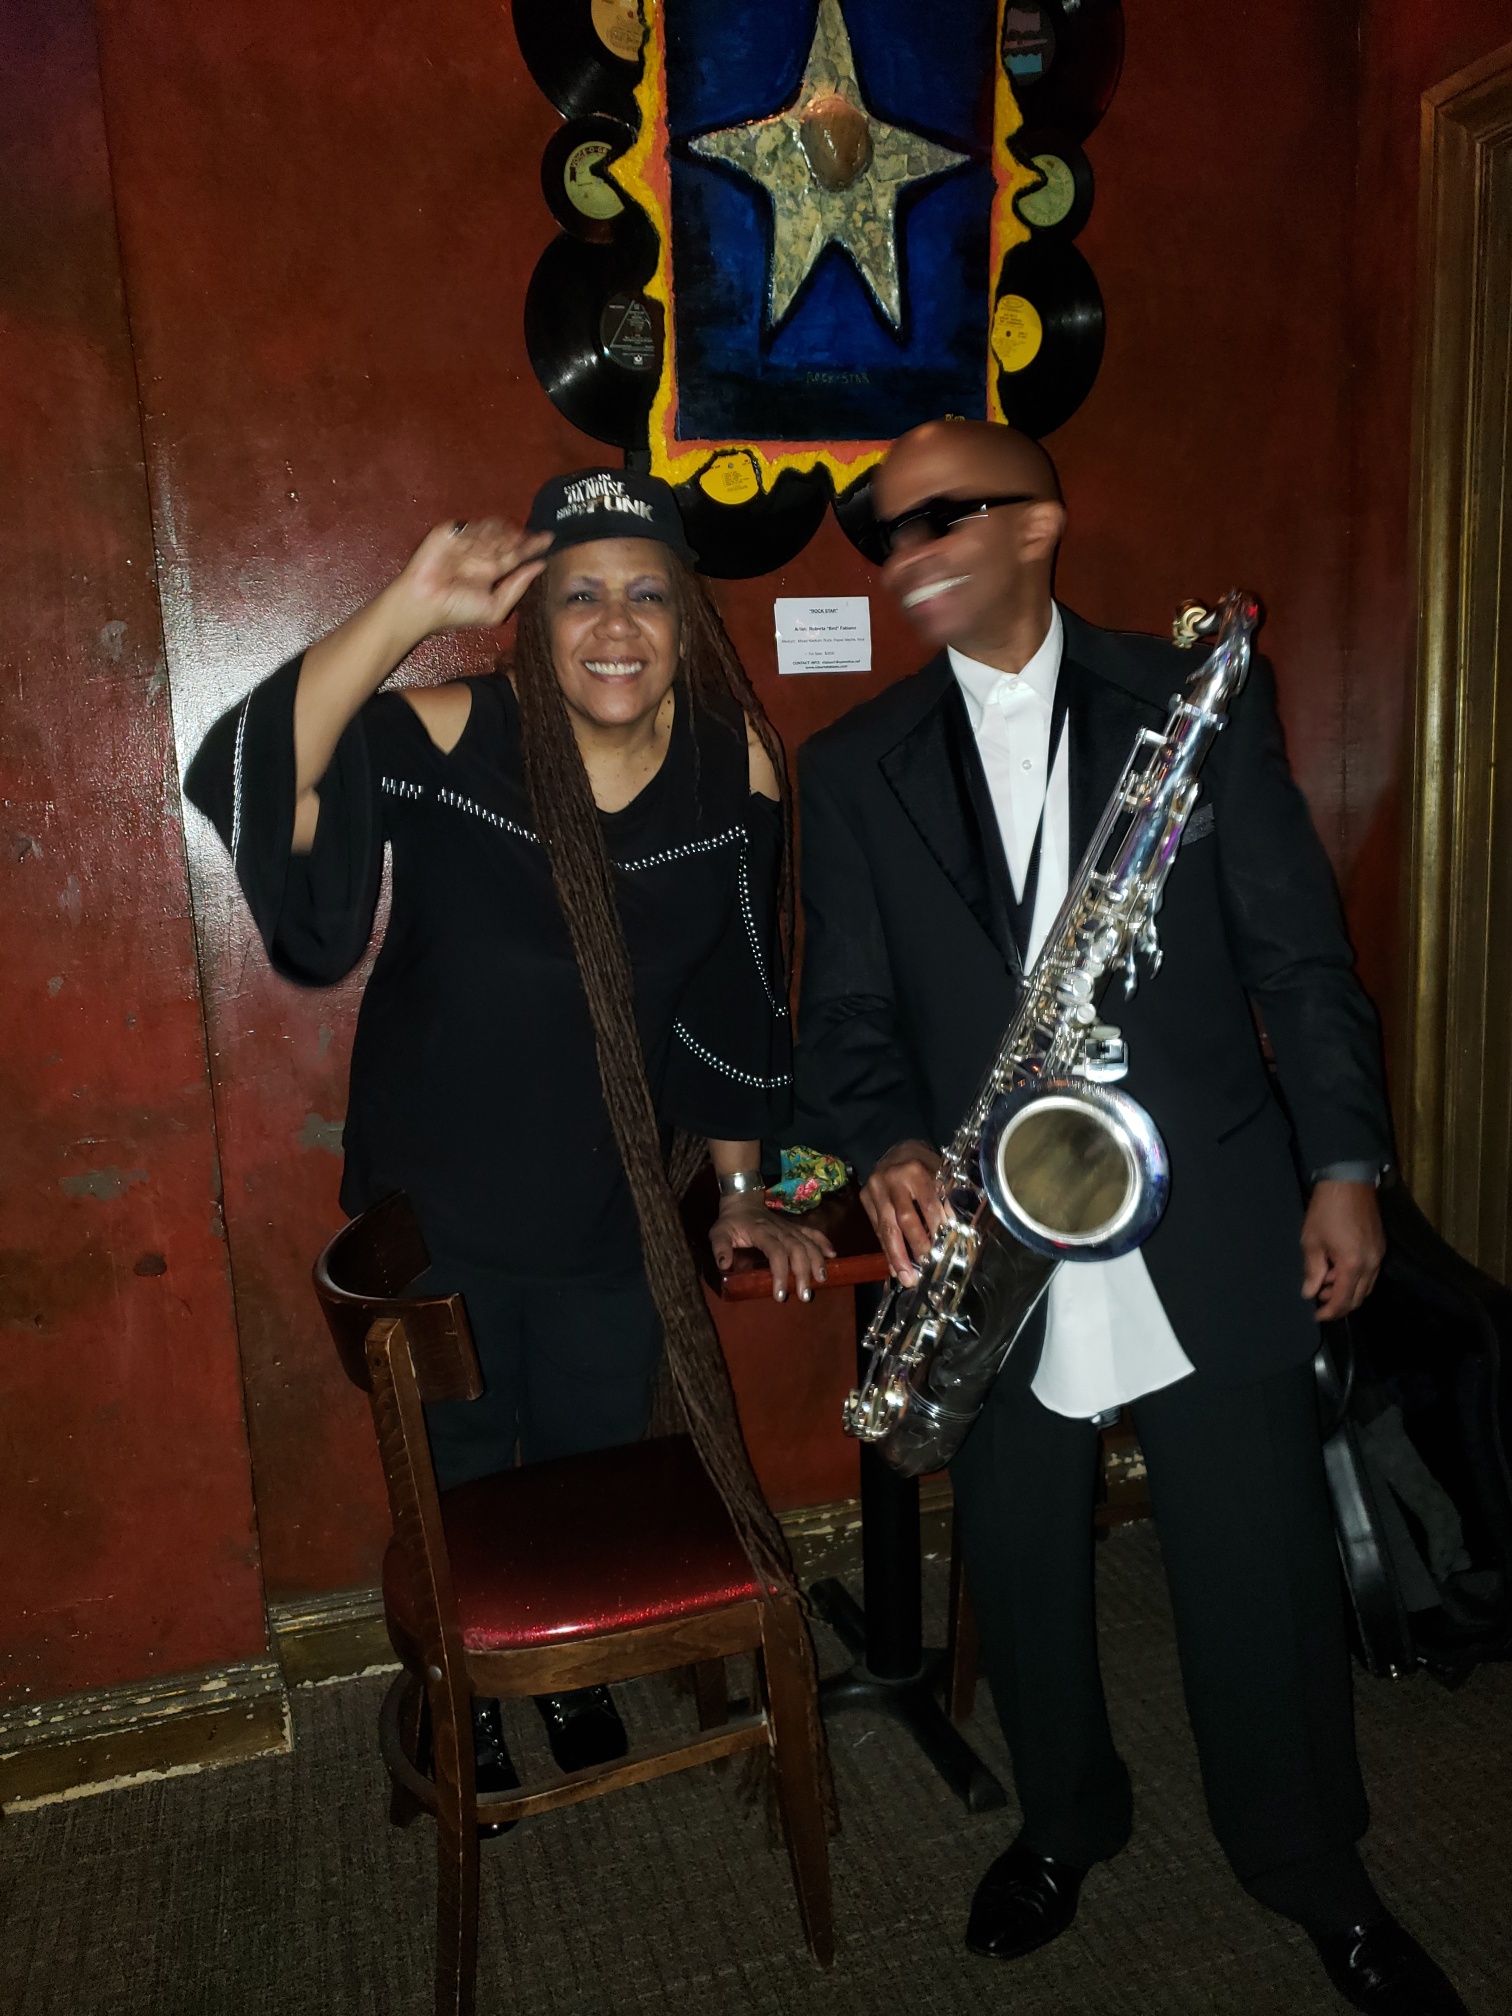 Johnny Long playing Tenor Sax at the Pro Jam with Felicia M. Collins guitarist for the David Letterman, Late Show Band in New York, NY